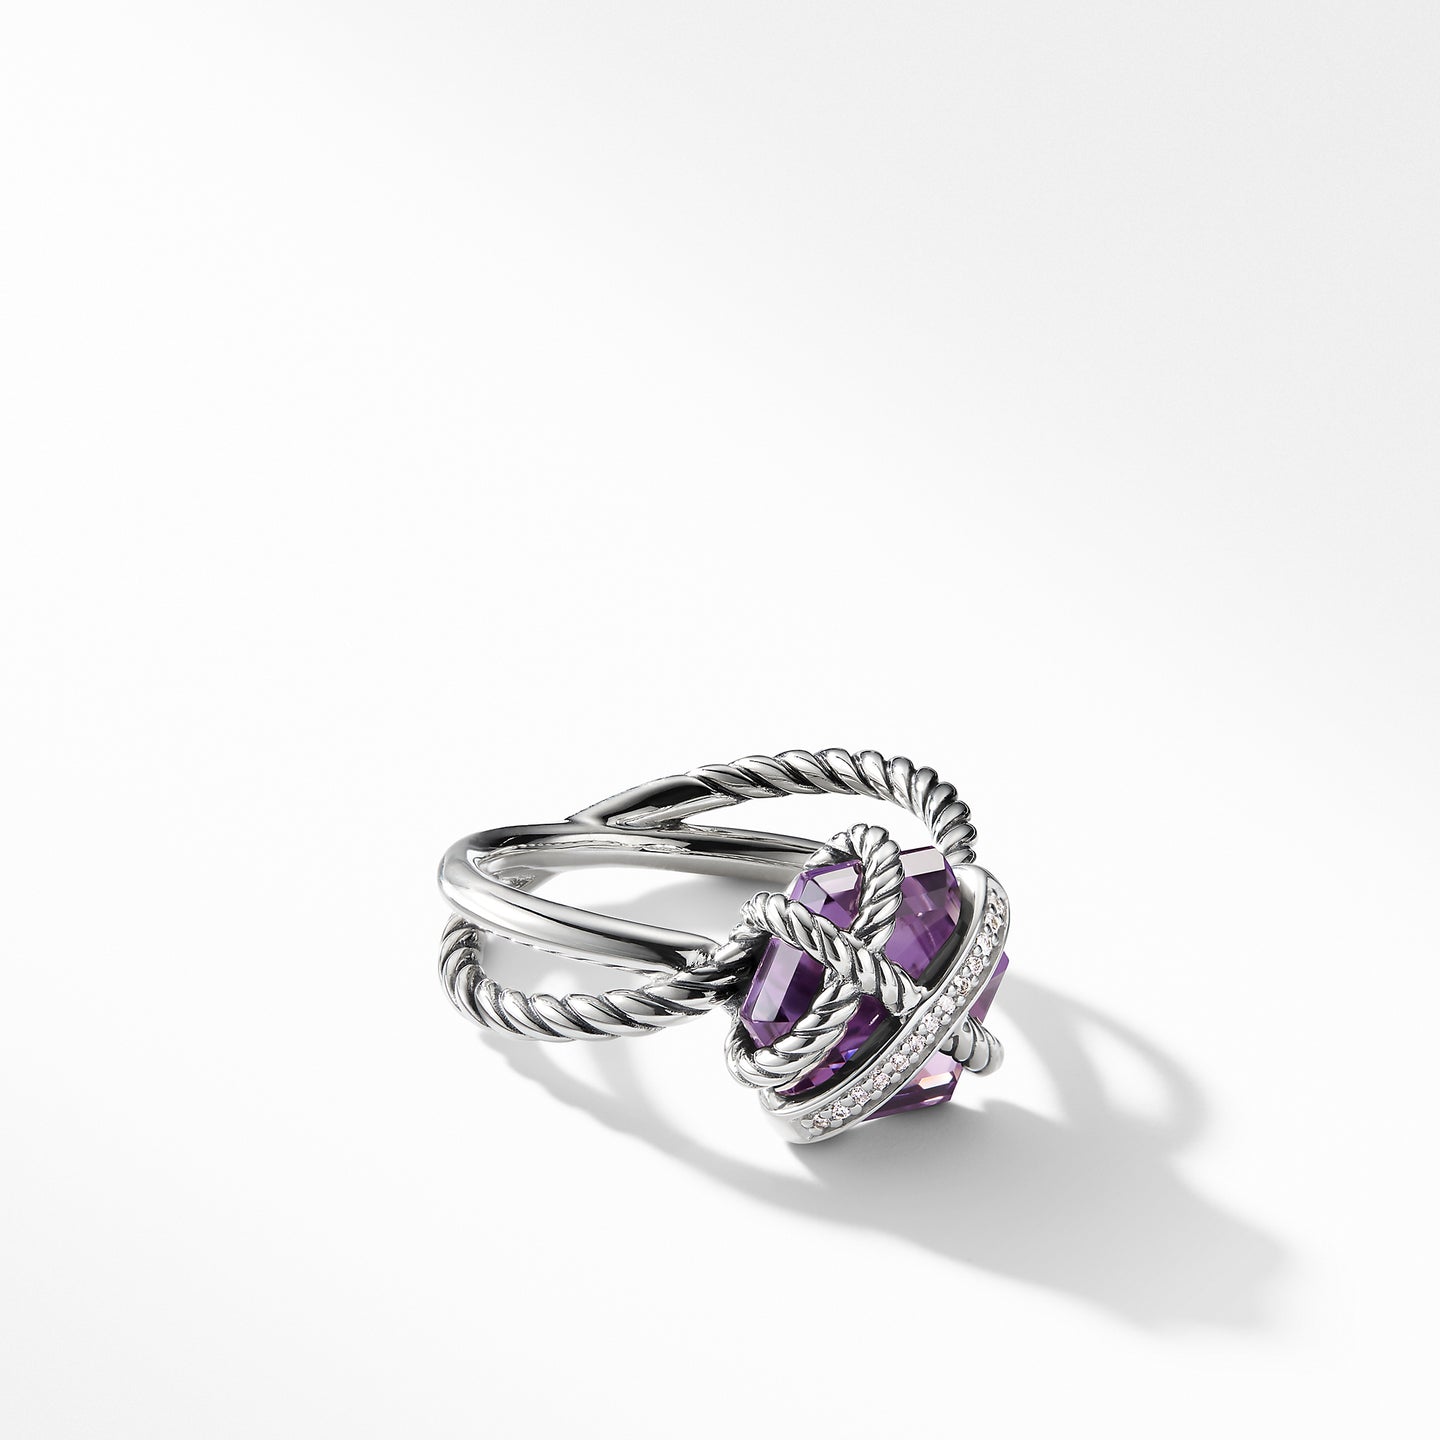 Cable Wrap Ring with Amethyst and Diamonds, Size 7